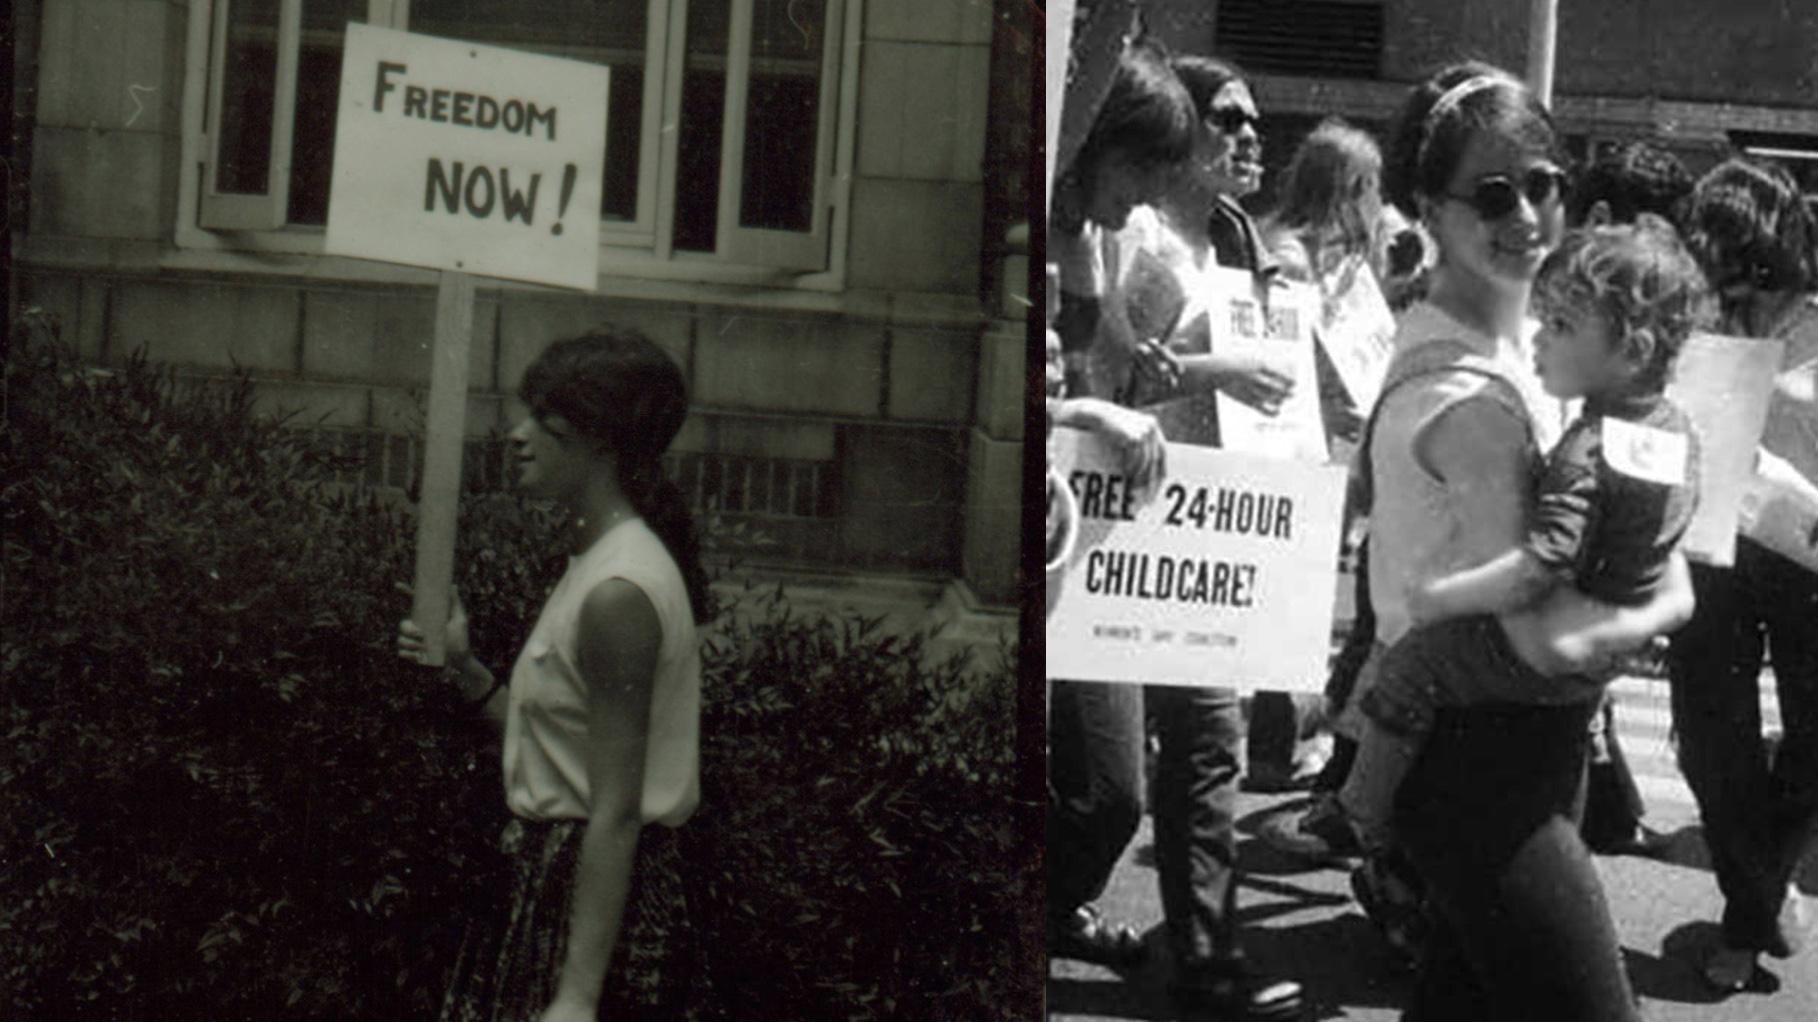 Heather Booth at Mississippi Freedom Summer rally in 1964, left, and at a child care demonstration in 1970 with one of her children. (Courtesy Heather Booth)